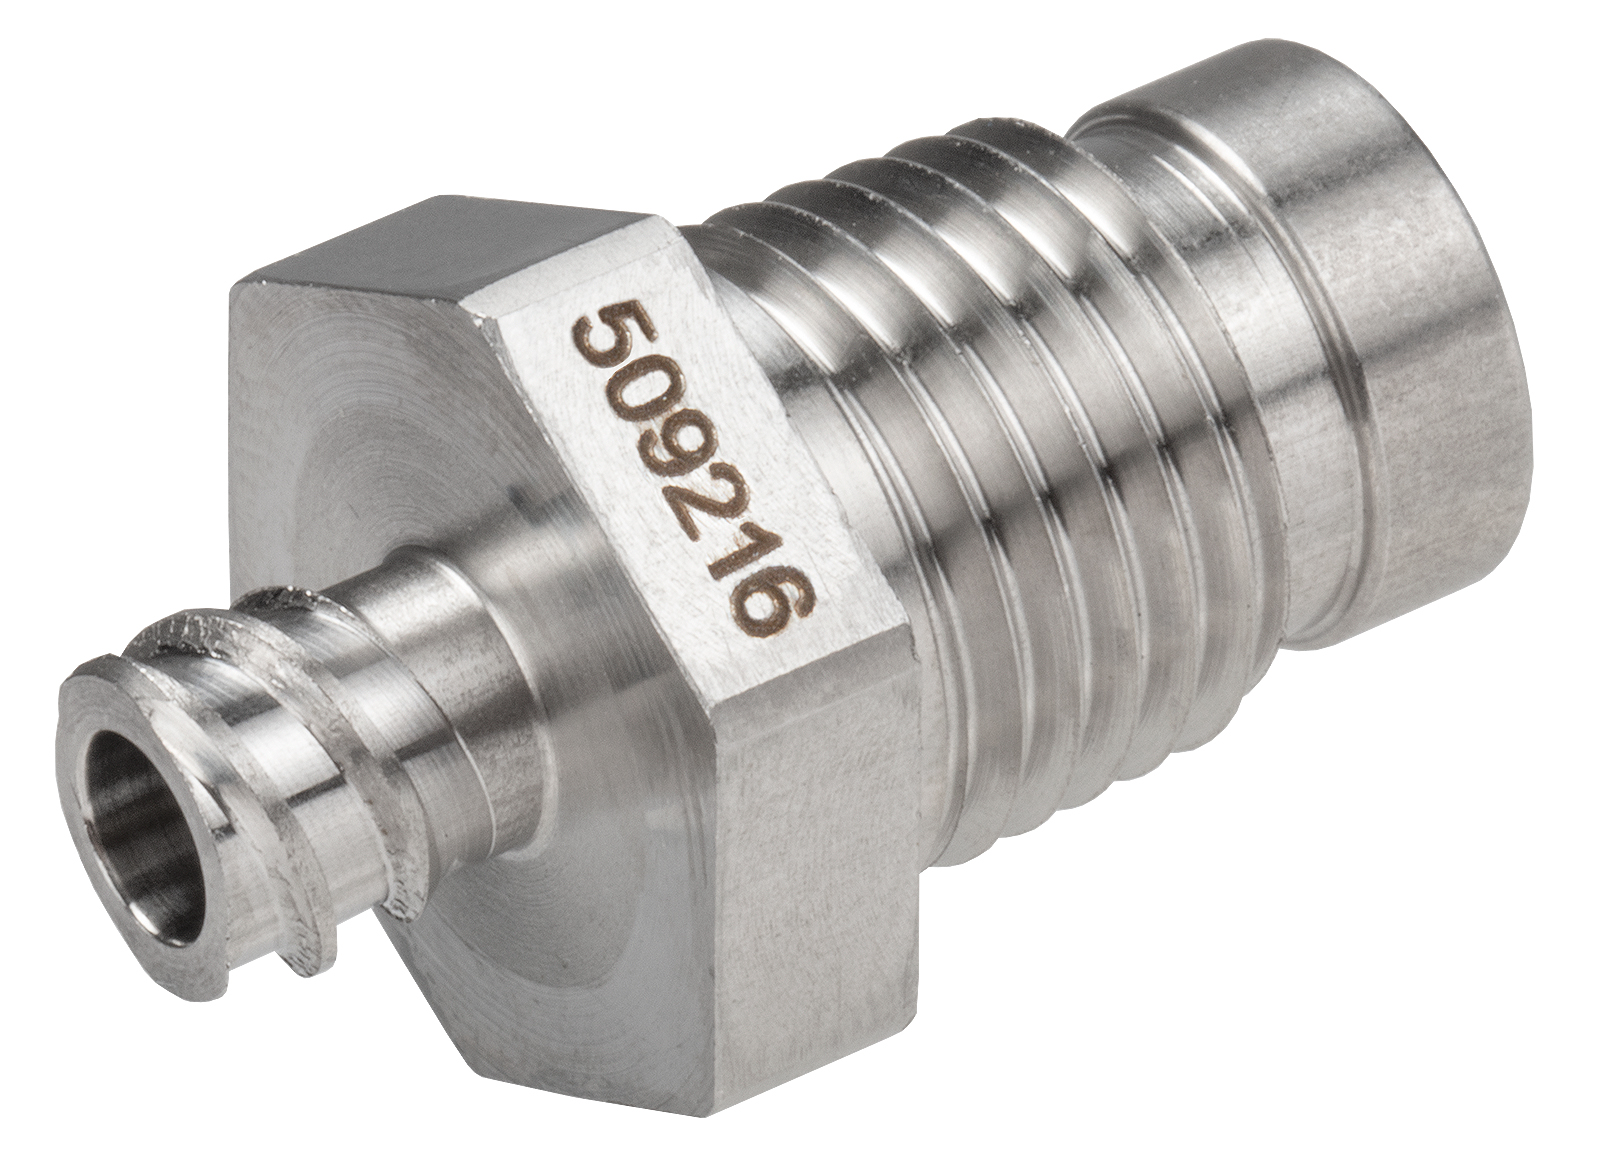 Luer-Lock (female) with NPT-1/4 thread, stainless steel 1.4305, with sealing area